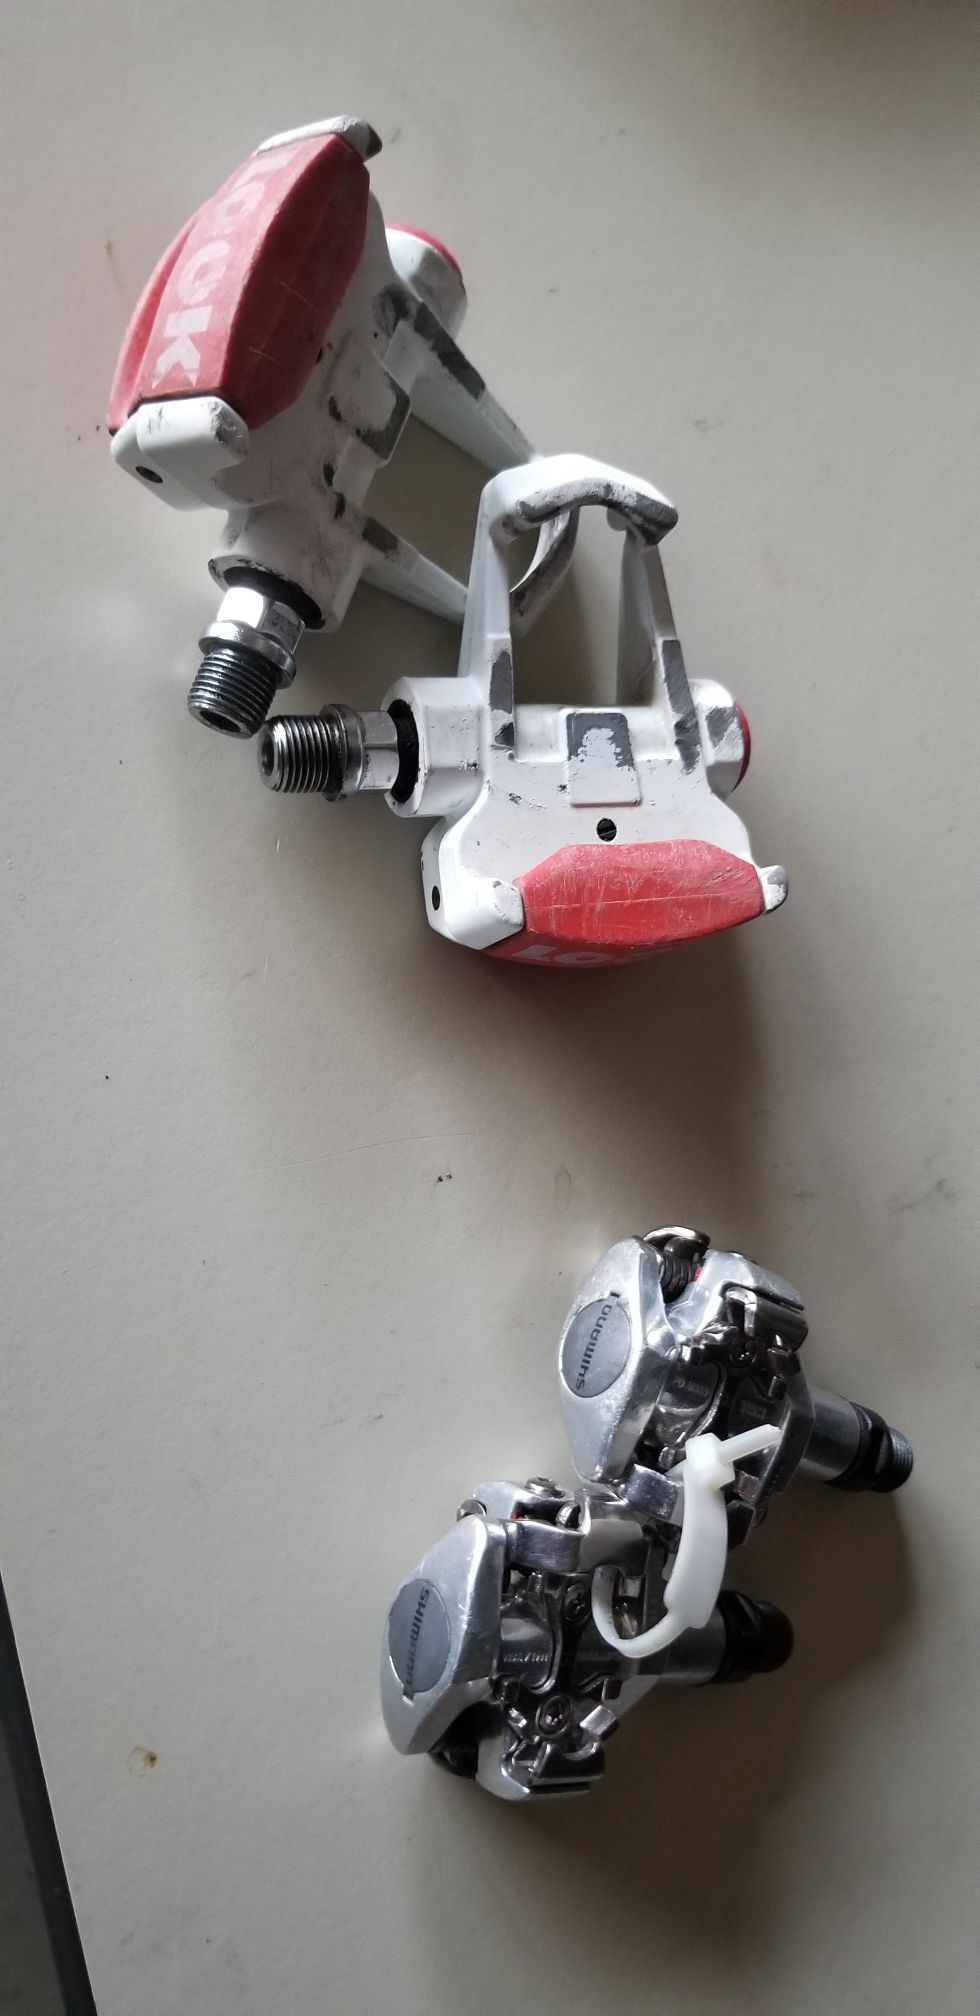 Clipless Bike Pedals - Shimano Deore SPD style or Look Rosd Bike Style